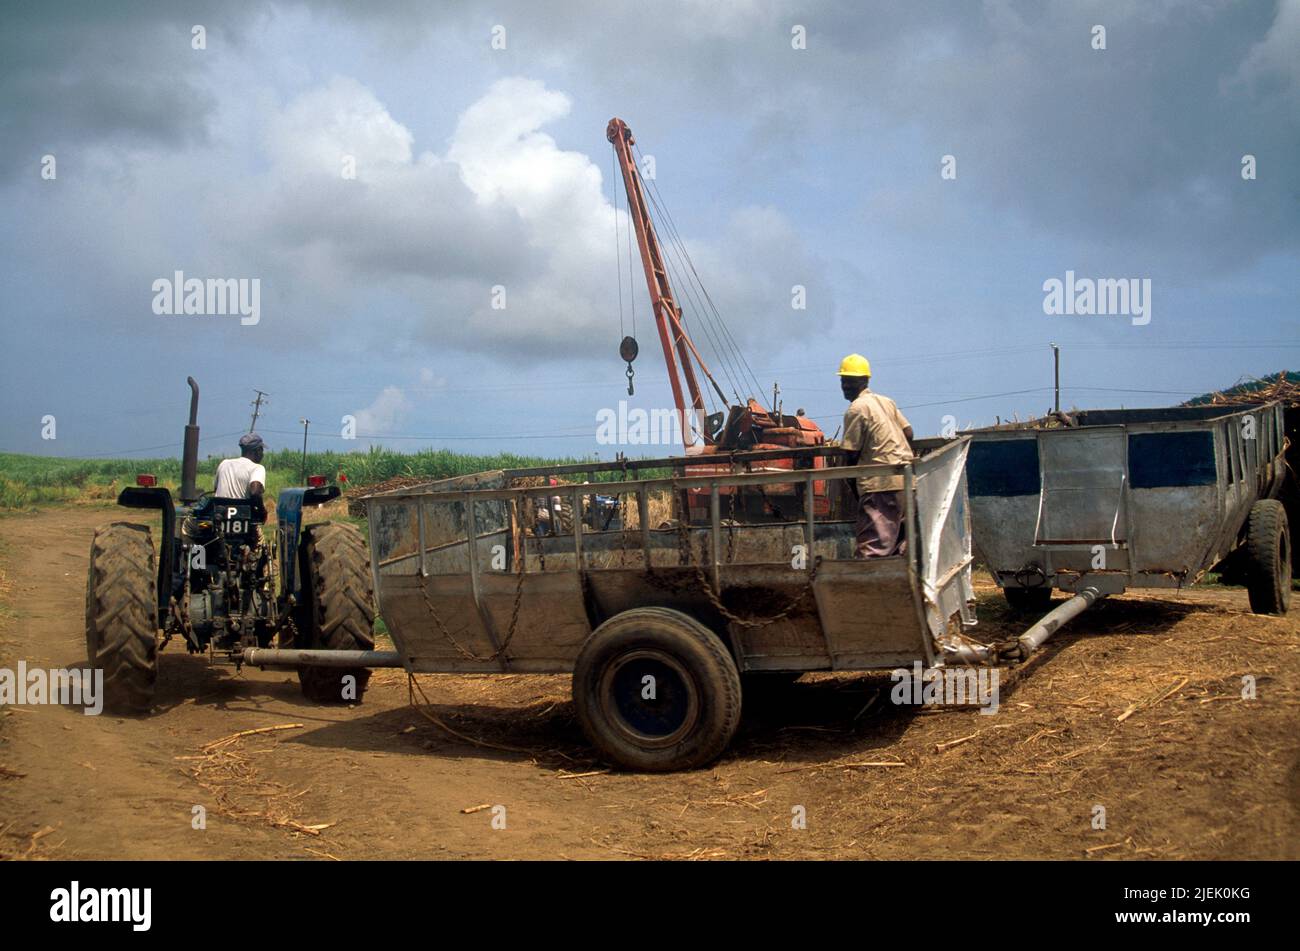 St Kitts People working on Tractor Harvesting Sugarcane Stock Photo